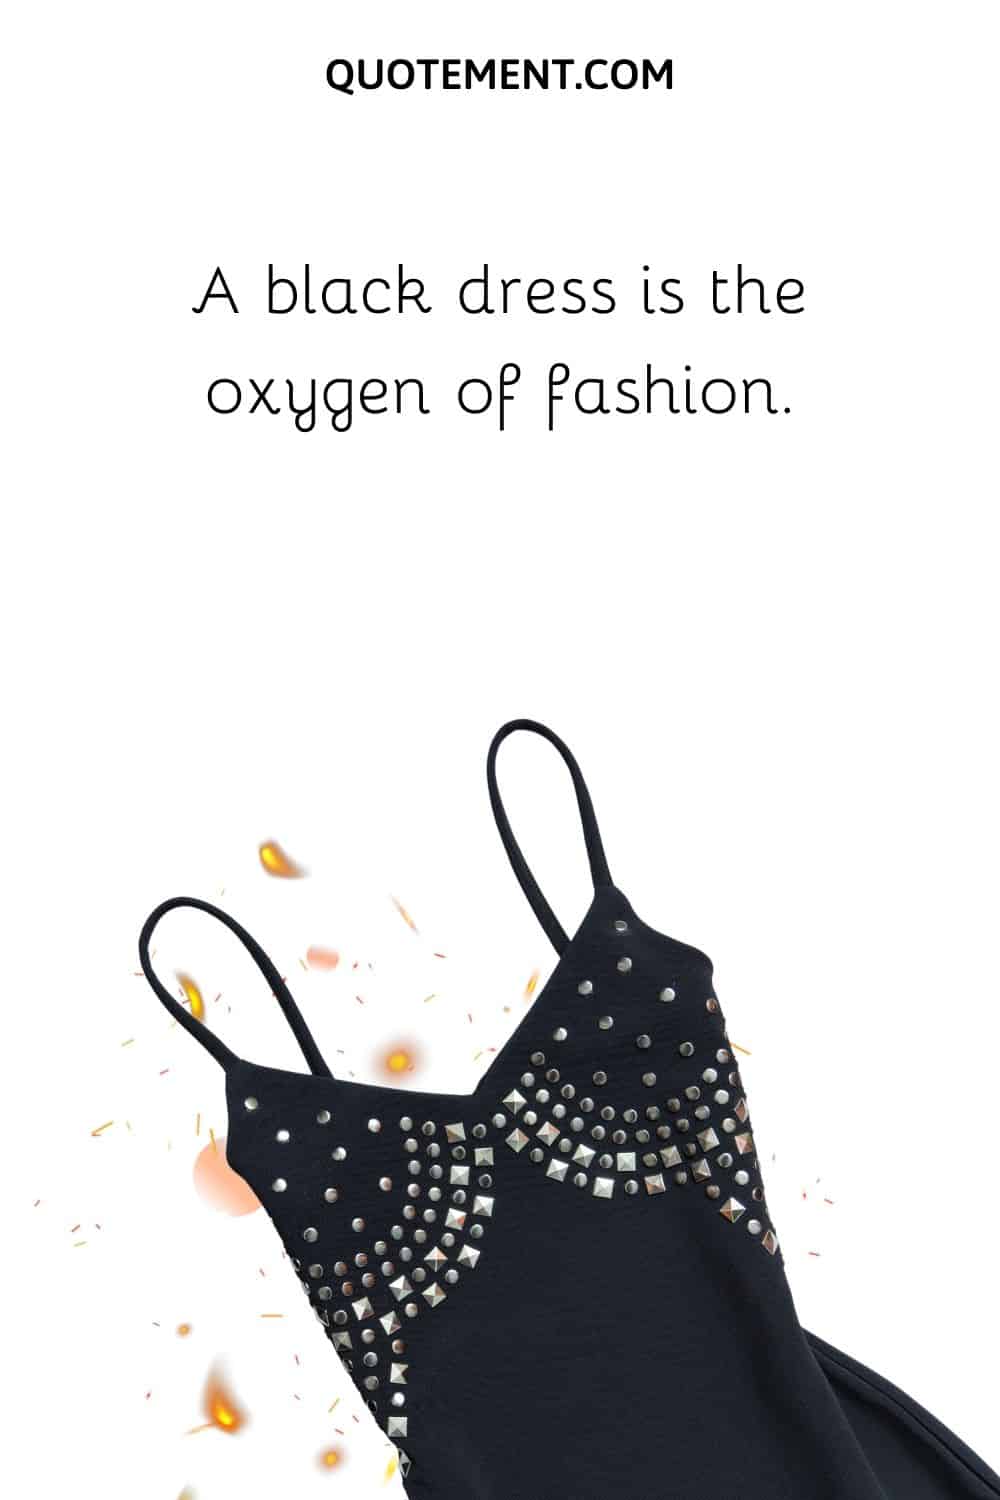 A black dress is the oxygen of fashion.